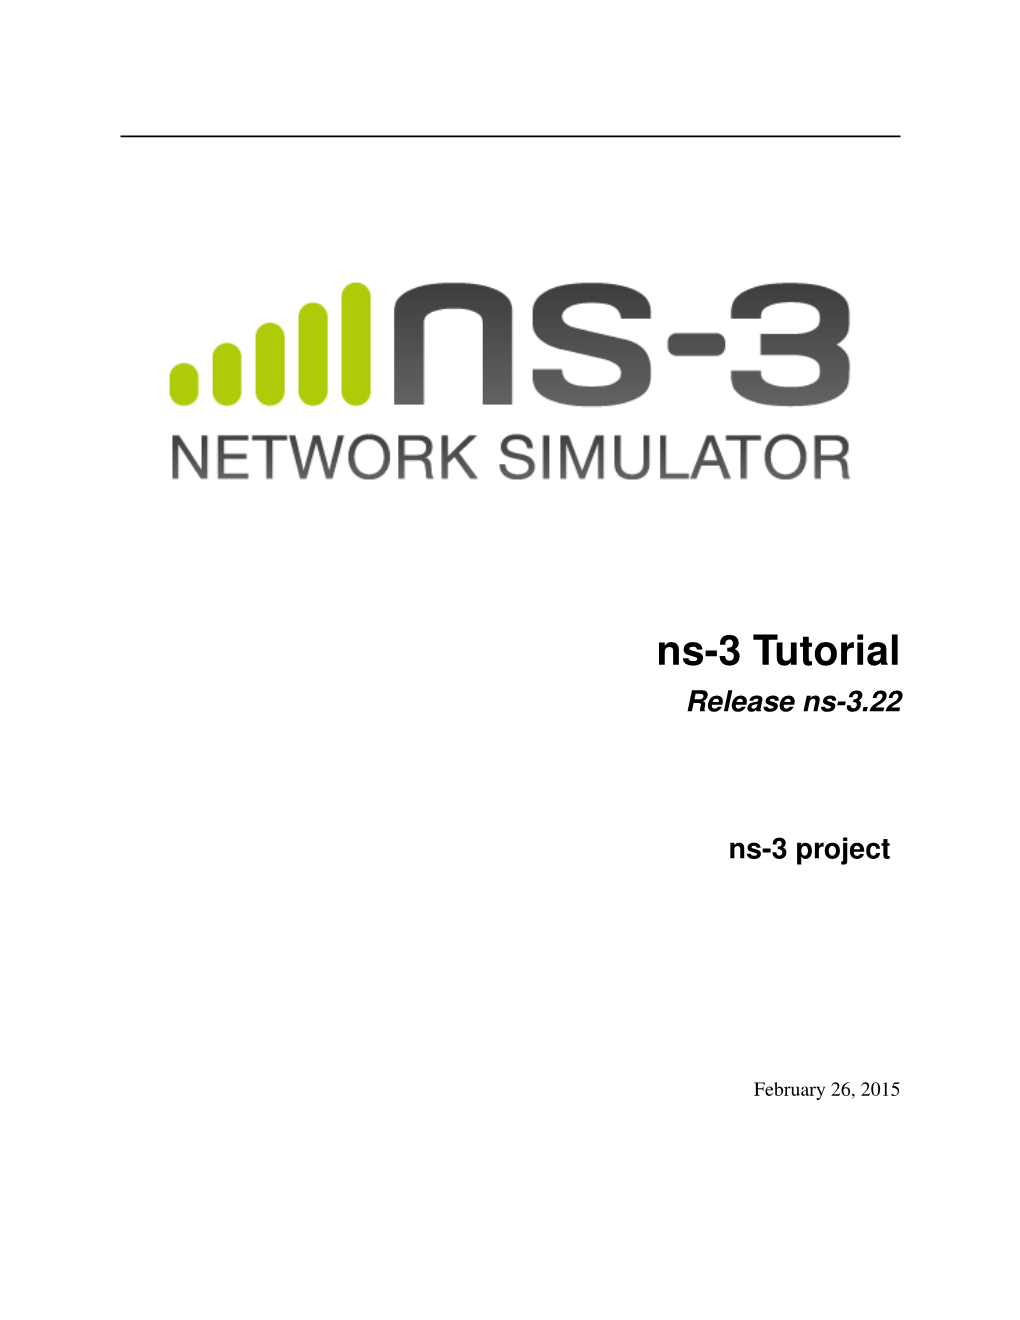 Ns-3 Tutorial Release Ns-3.22